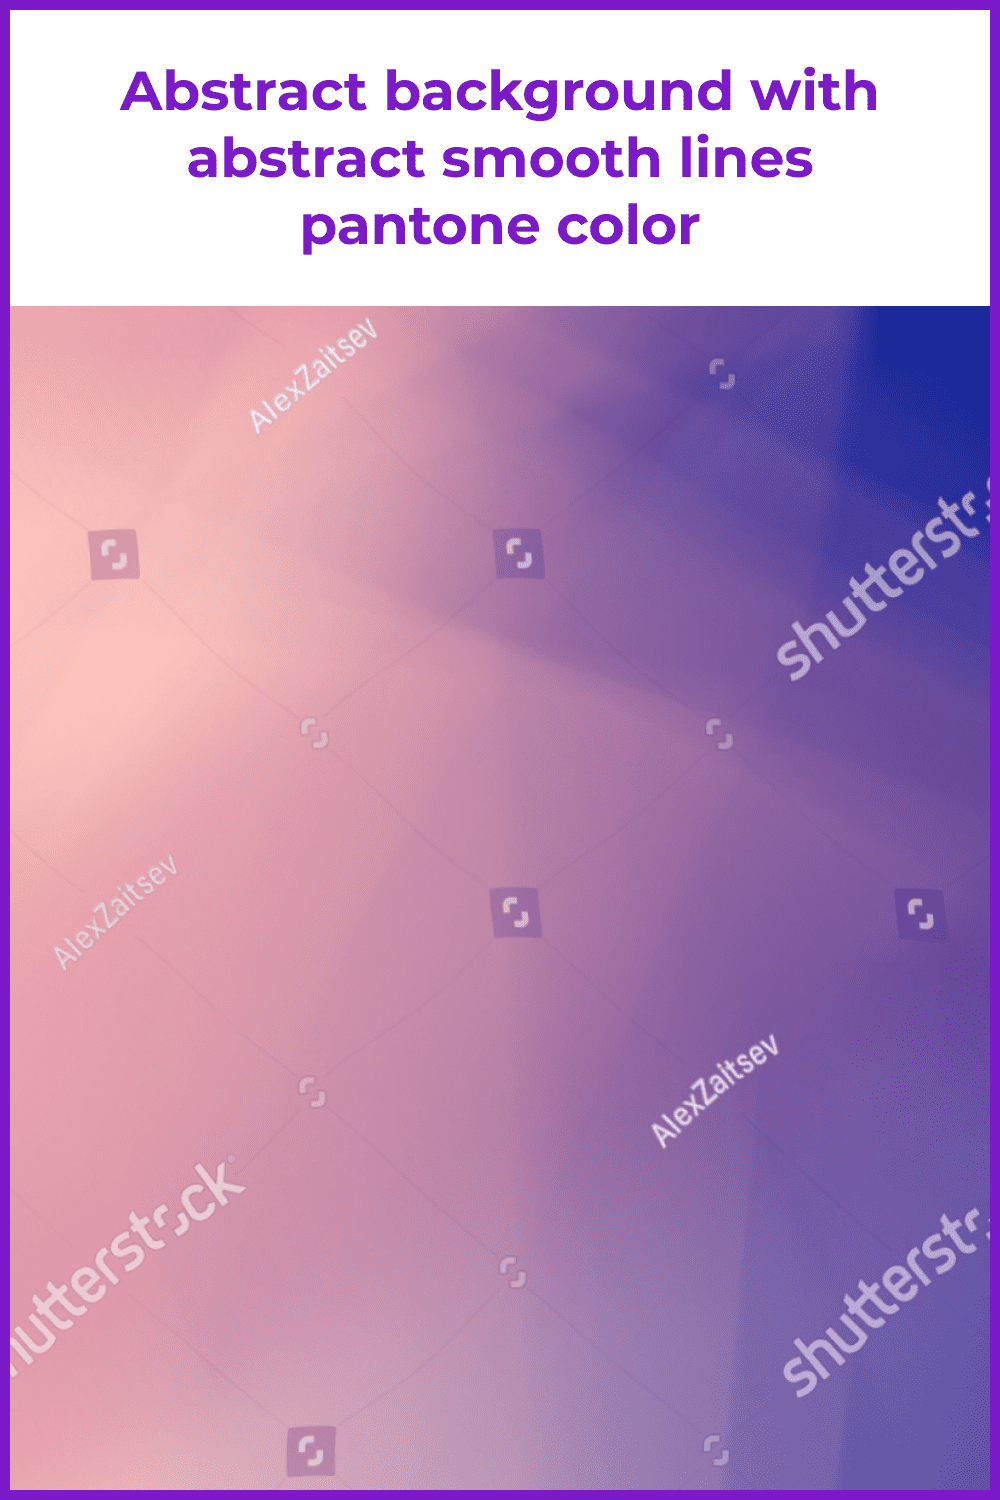 Abstract background with abstract smooth lines in pantone color.